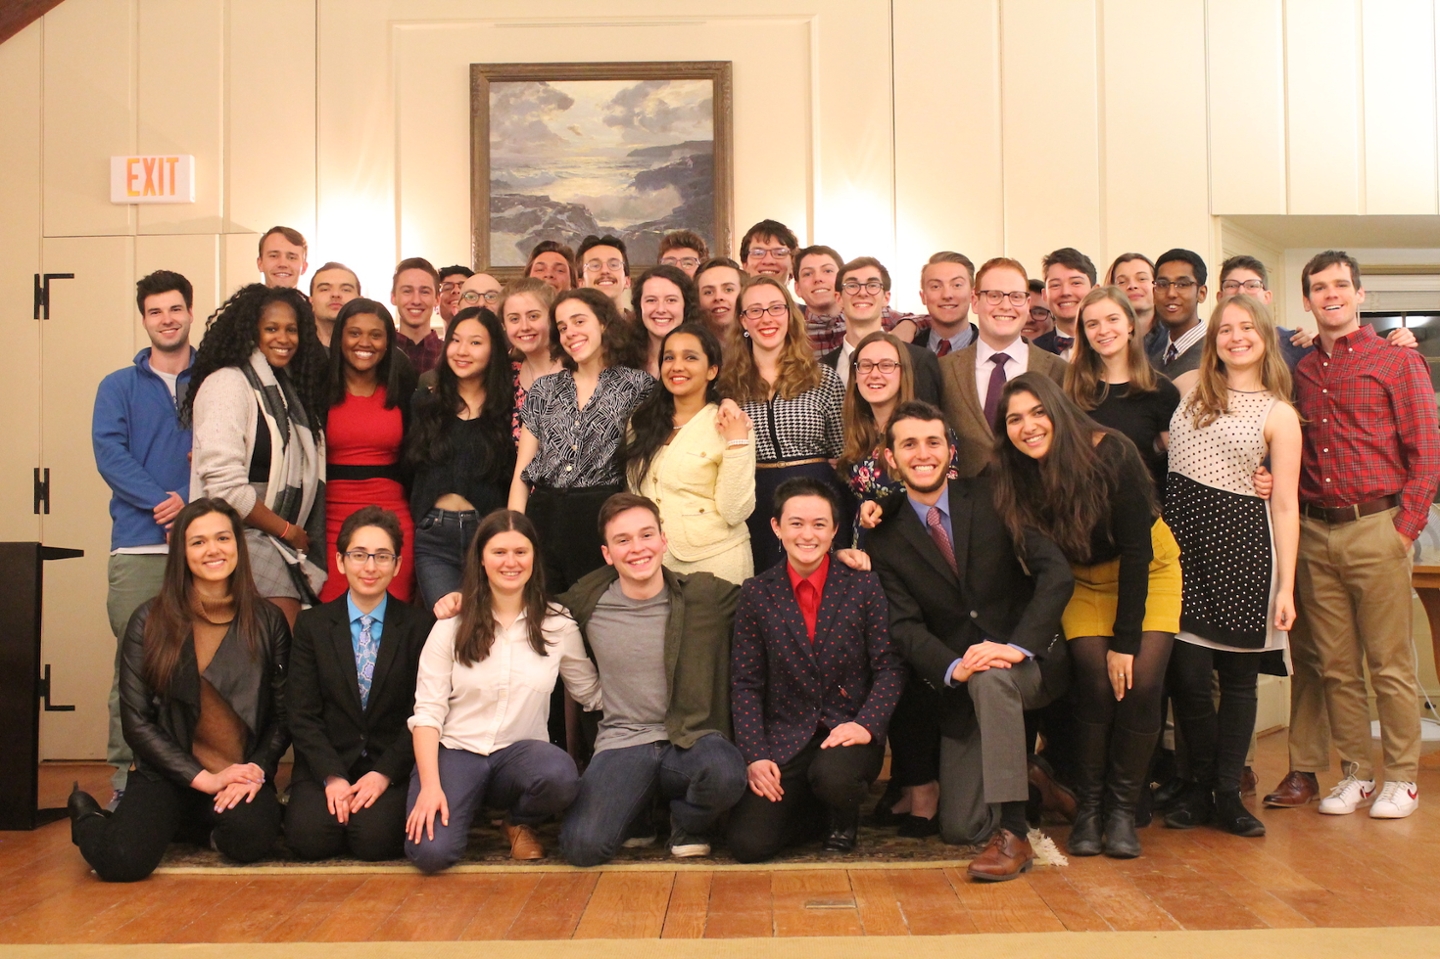 Peucinians at their 200th disputation, on April 25, 2019 (since 2007)